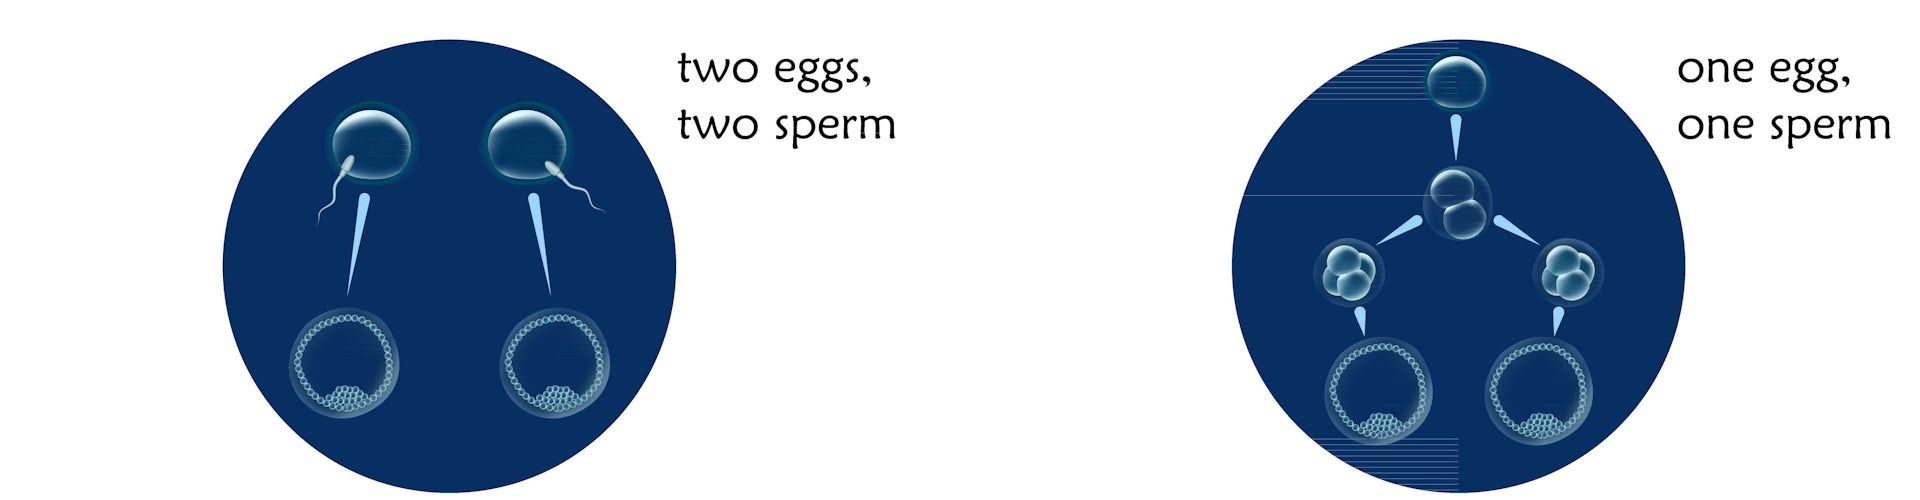 diagram of two sperm fertilizing two eggs yielding two embryos, and one sperm fertilizing one egg that divides into two separate embryos